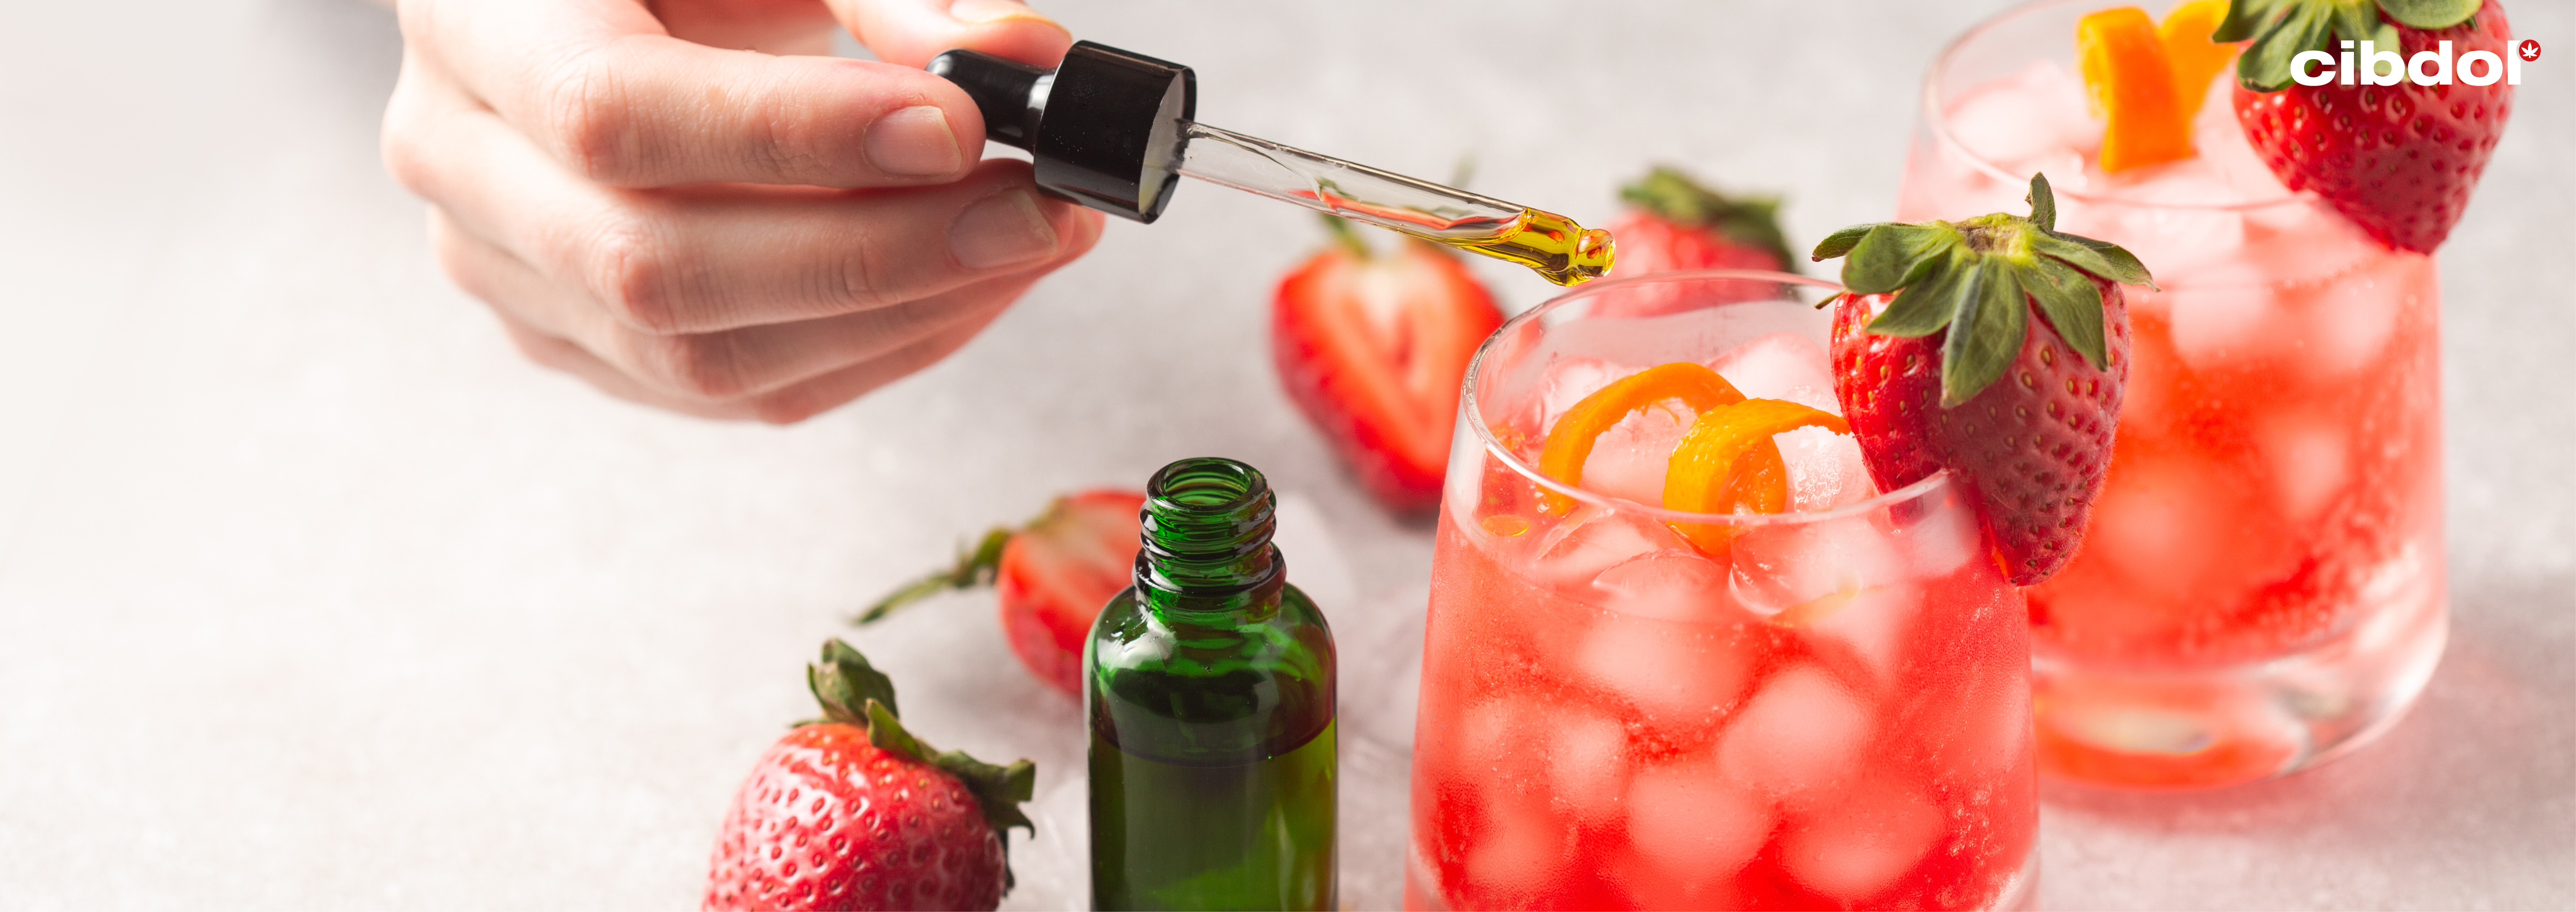 Can you mix CBD oil and alcohol?